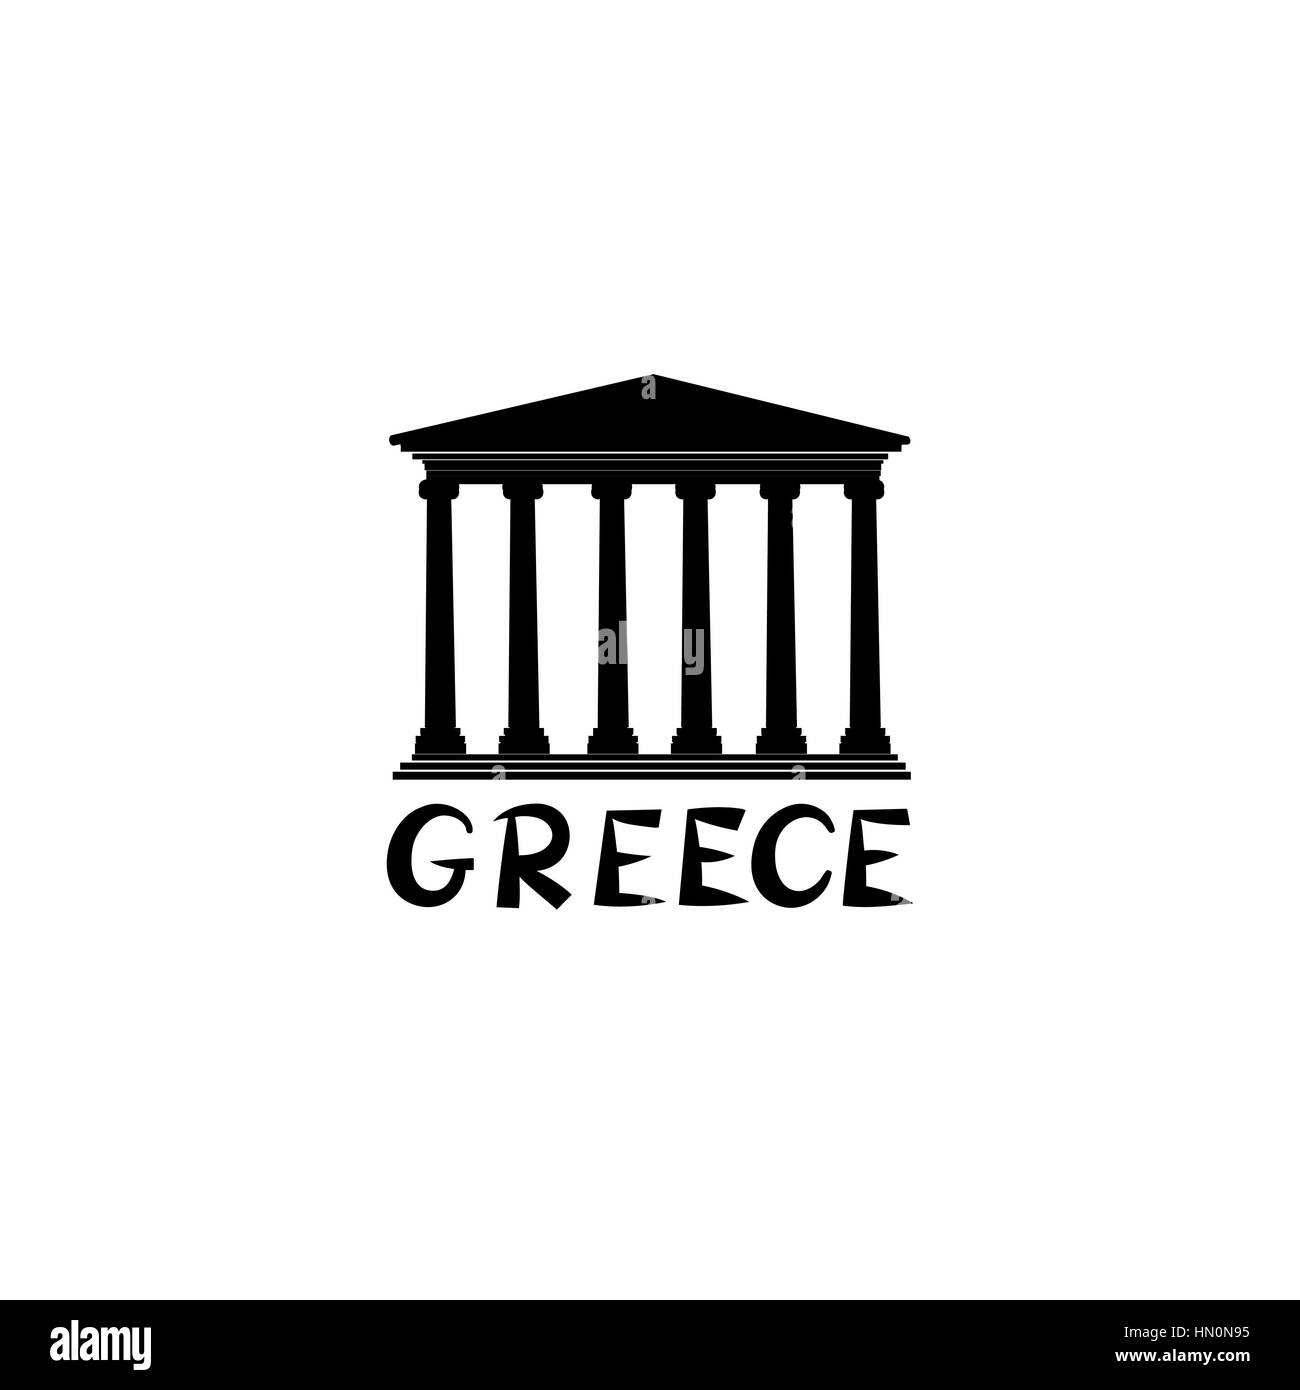 Greece sign. Greek famous landmark temple. Travel Greece label. Greek architectural icon with  lettering Stock Vector